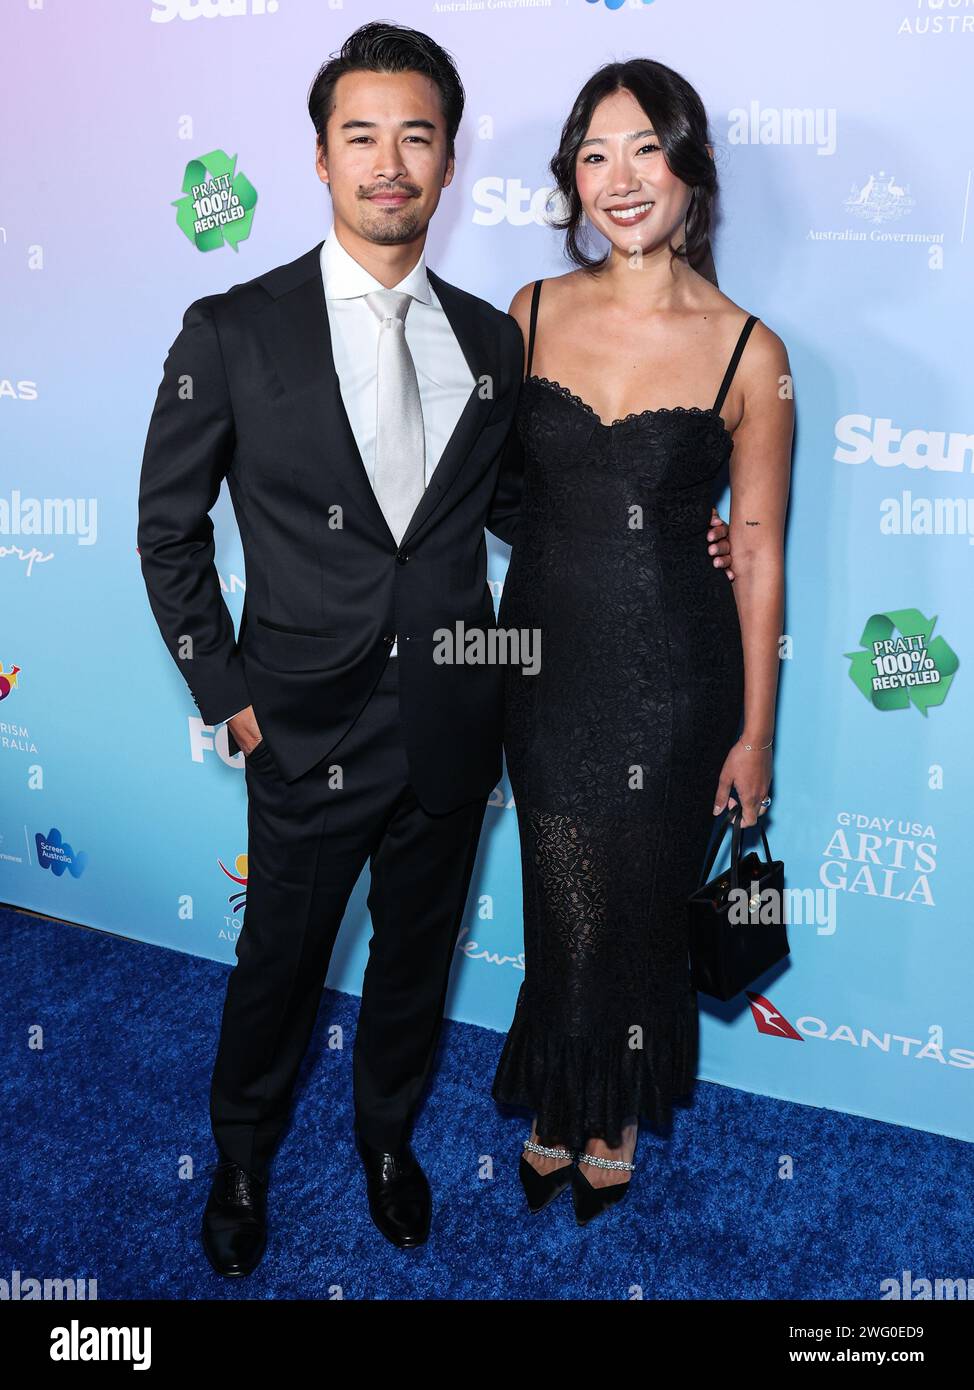 LOS ANGELES, CALIFORNIA, USA - FEBRUARY 01: Jordan Rodrigues and Olivia Liang arrive at the 21st Annual G'Day USA (American Australian Association) Arts Gala 2024 held at the Skirball Cultural Center on February 1, 2024 in Los Angeles, California, United States. (Photo by Xavier Collin/Image Press Agency) Stock Photo